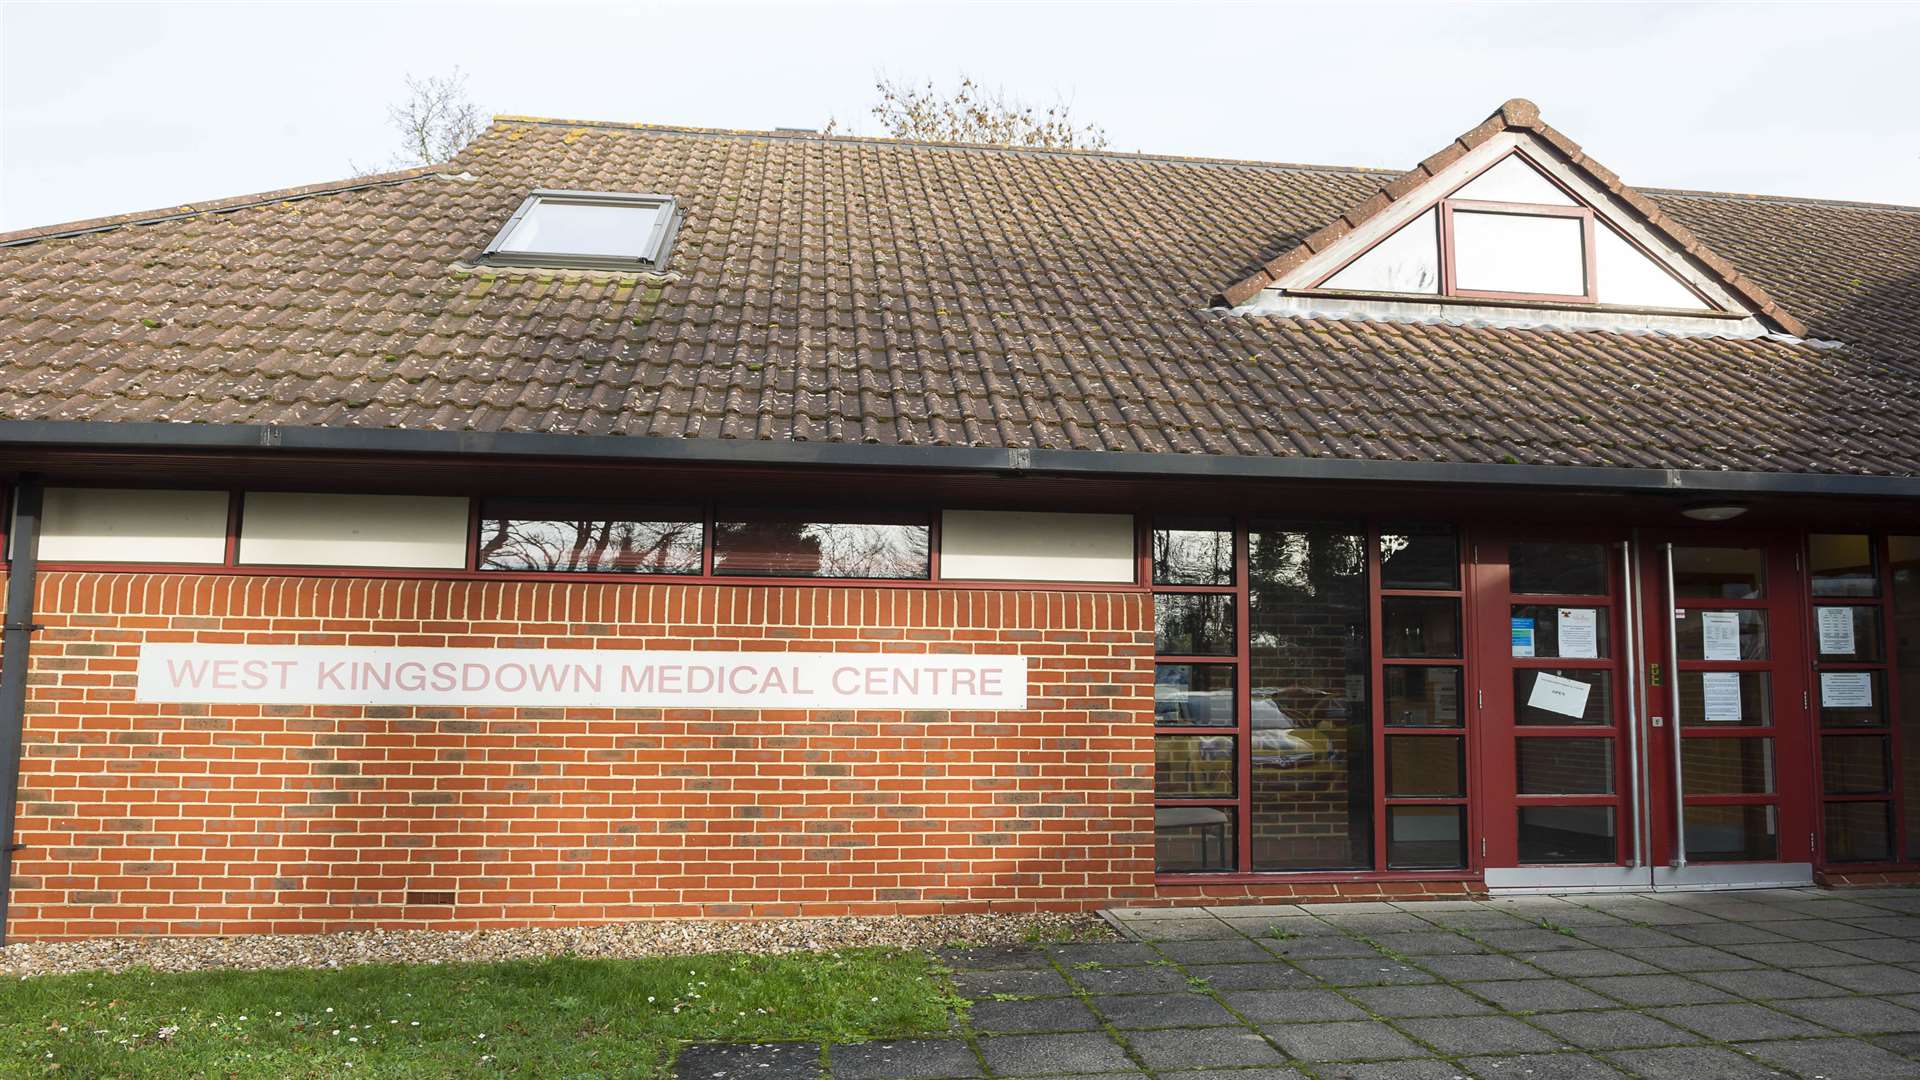 A team of new GPs will take over patient care at West Kingsdown Medical Centre